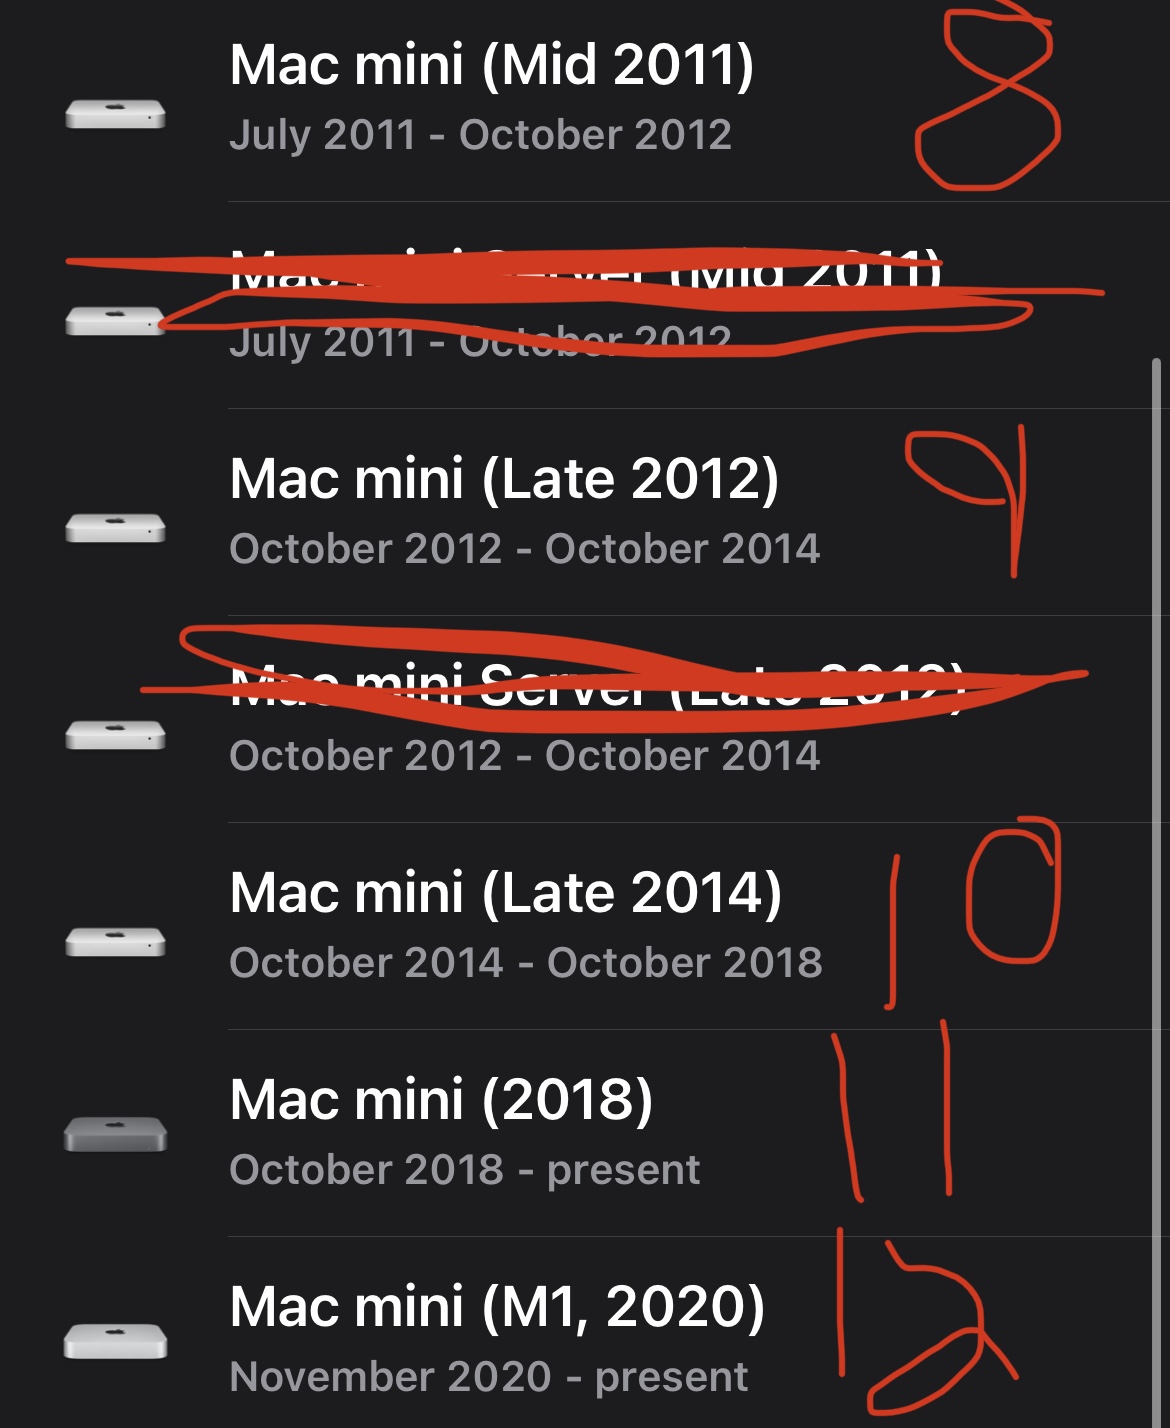 Two Unreleased Macs Spotted in Steam's Database - MacRumors